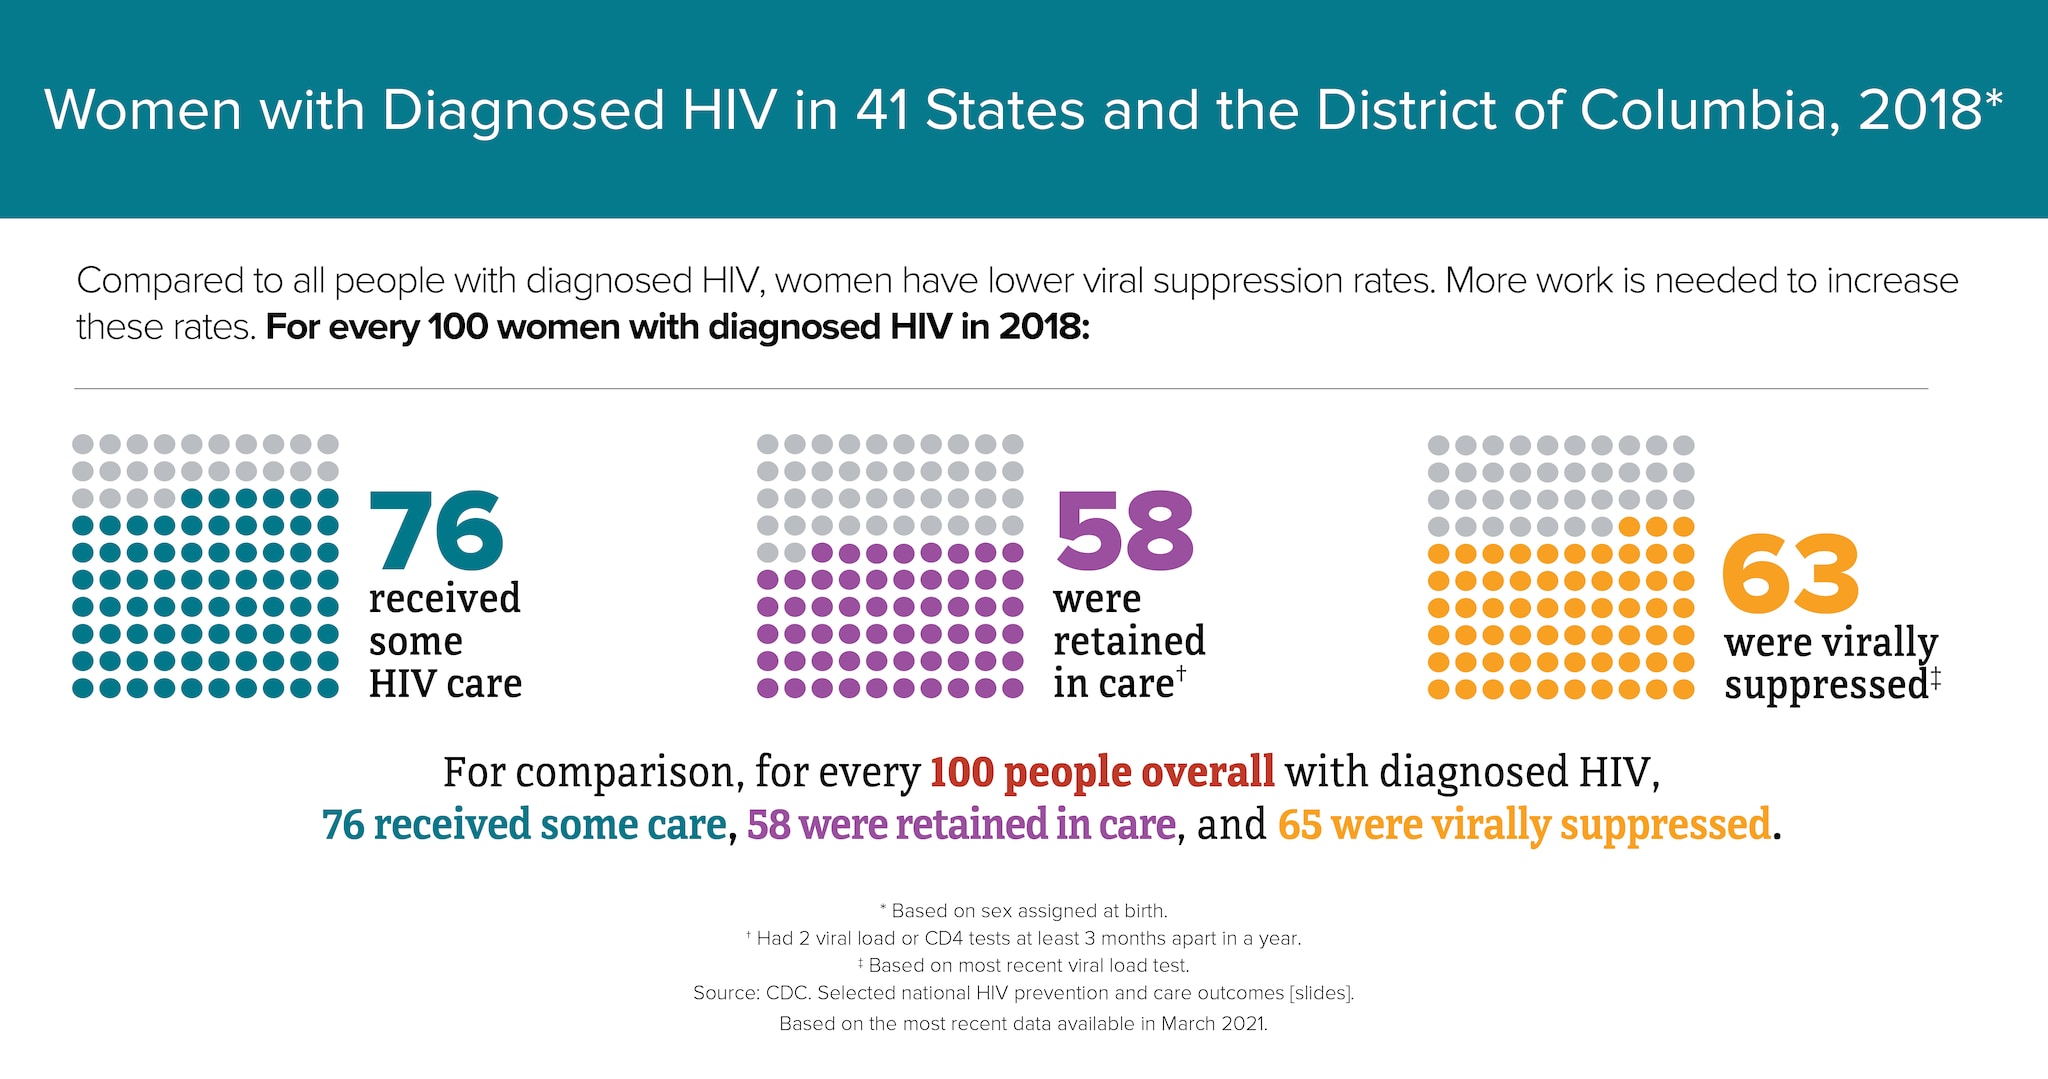 Infographic title is Women with HIV. A group image is to the right of the infographic. Text reads When compared to all people with HIV, women have about the same viral suppression rates. For every 100 women with HIV in 2018: 90 received an HIV diagnosis, 68 received some HIV care, 52 were retained in care, and 56 were virally suppressed. For comparison, for every 100 people overall with HIV, 86 received an HIV diagnosis, 65 received some HIV care, 50 were retained in care, and 56 were virally suppressed. Get tested. Get in care. Stay in care. Stay healthy.